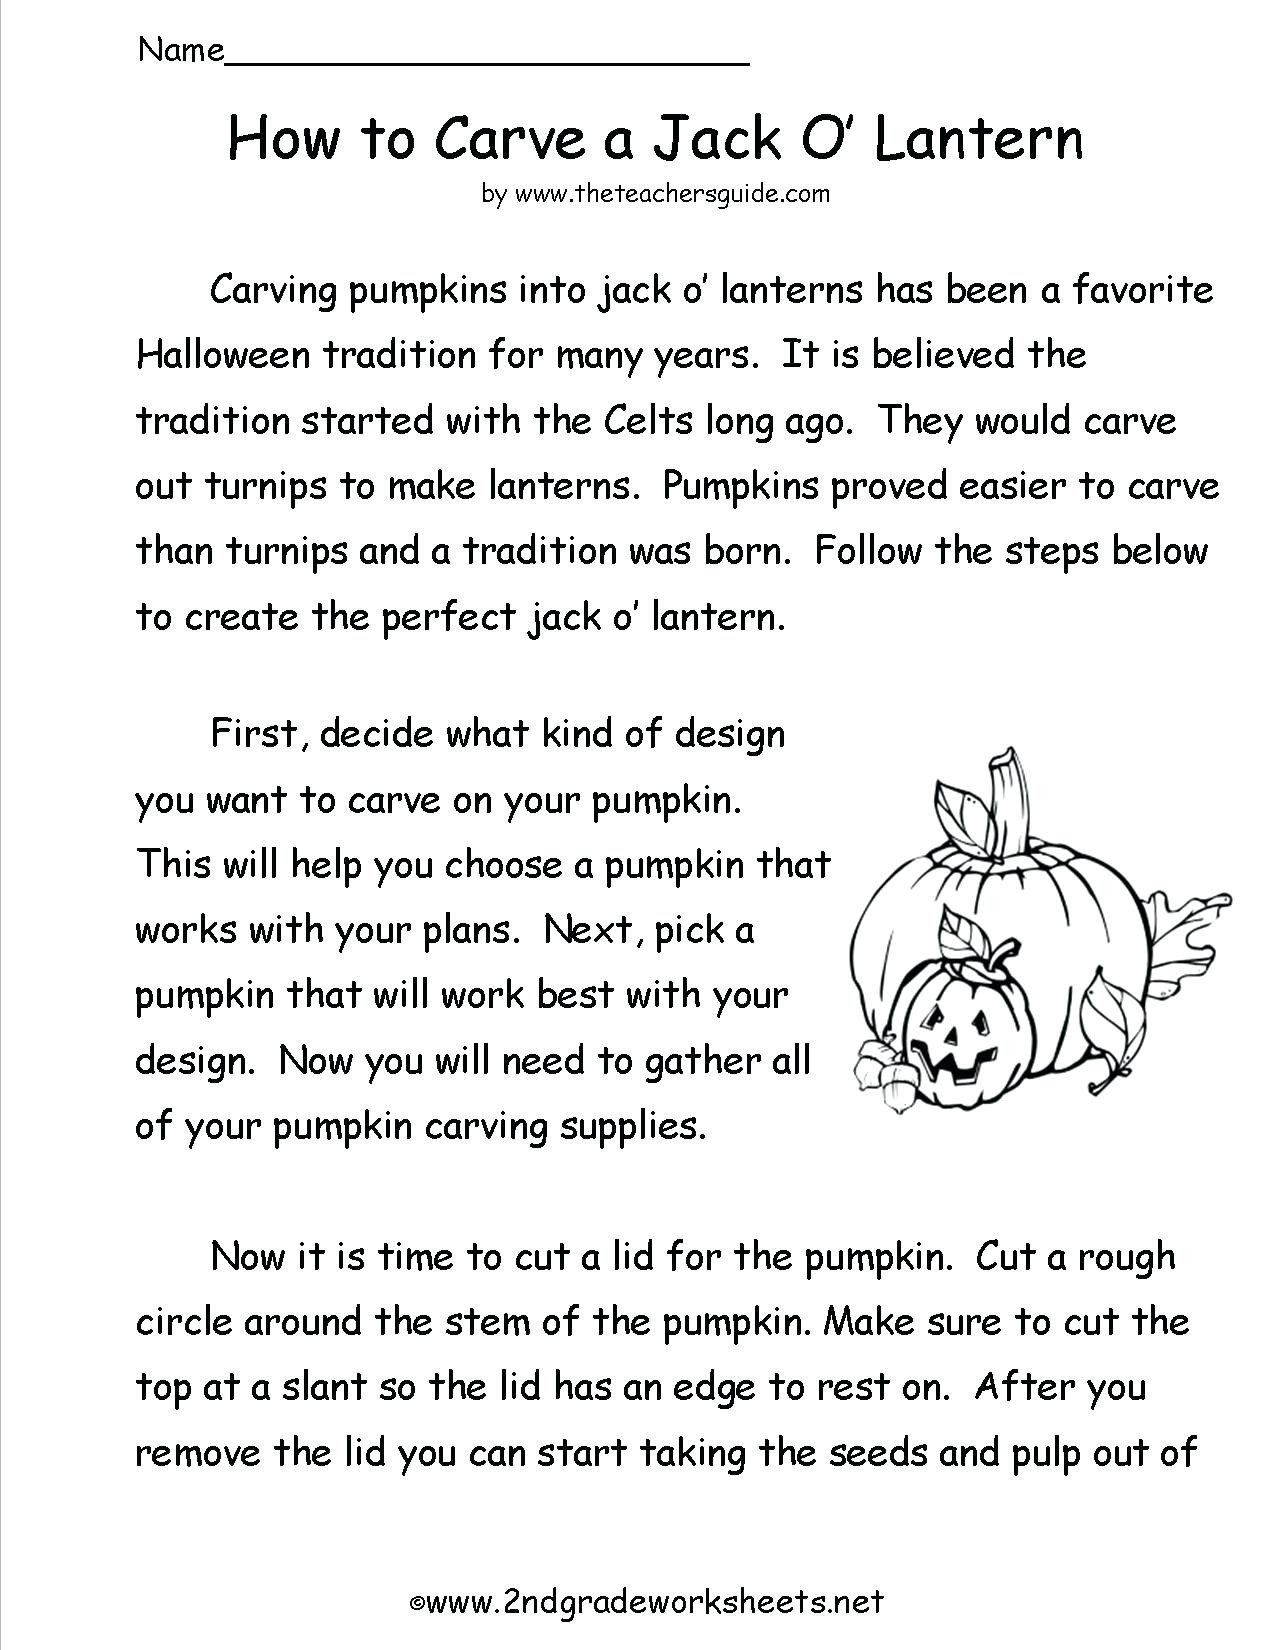 3rd grade reading theme worksheets